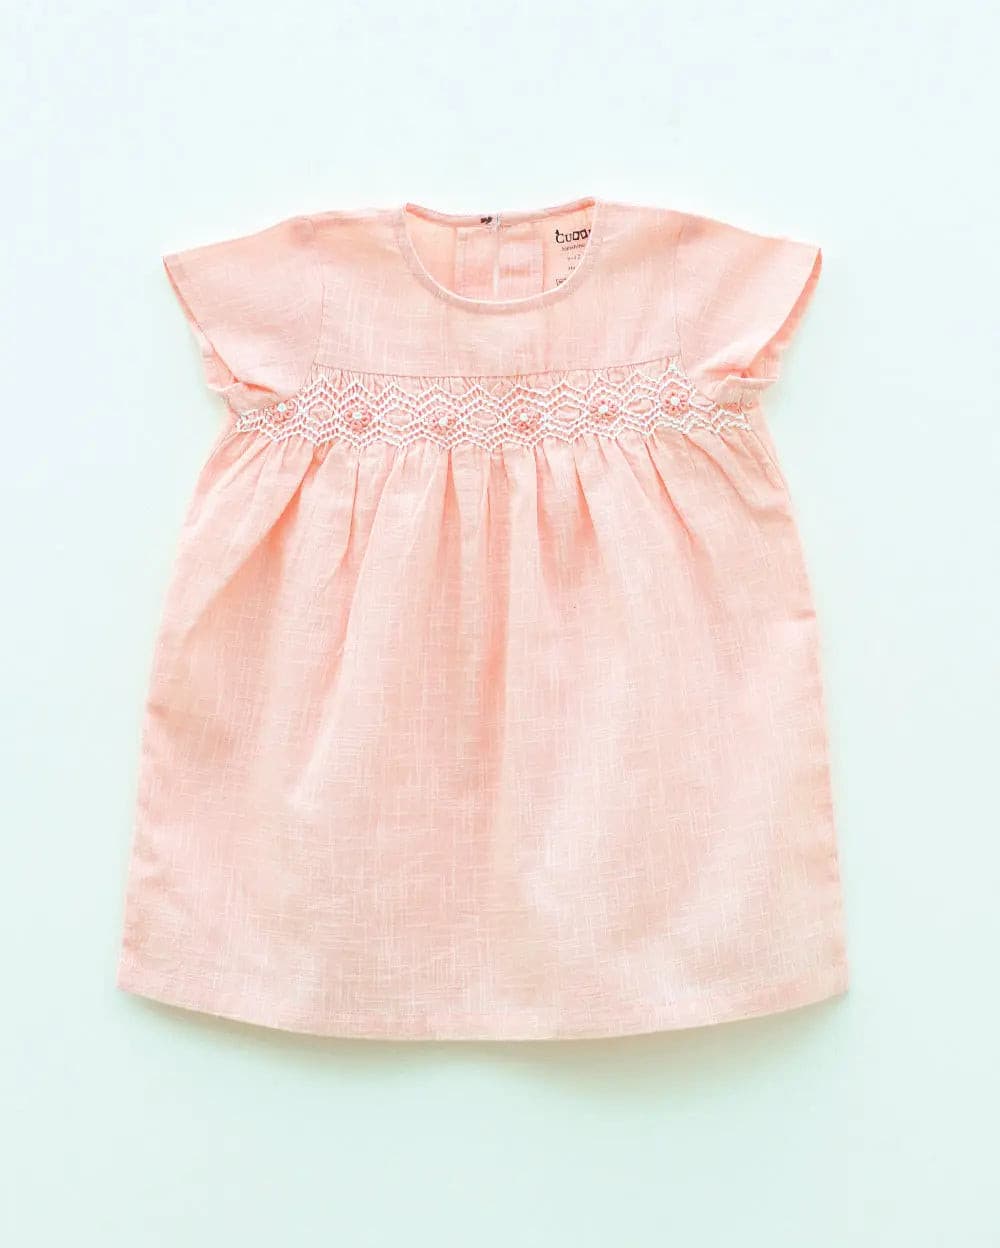 Cotton Candy Princess Frock Eartyhtweens